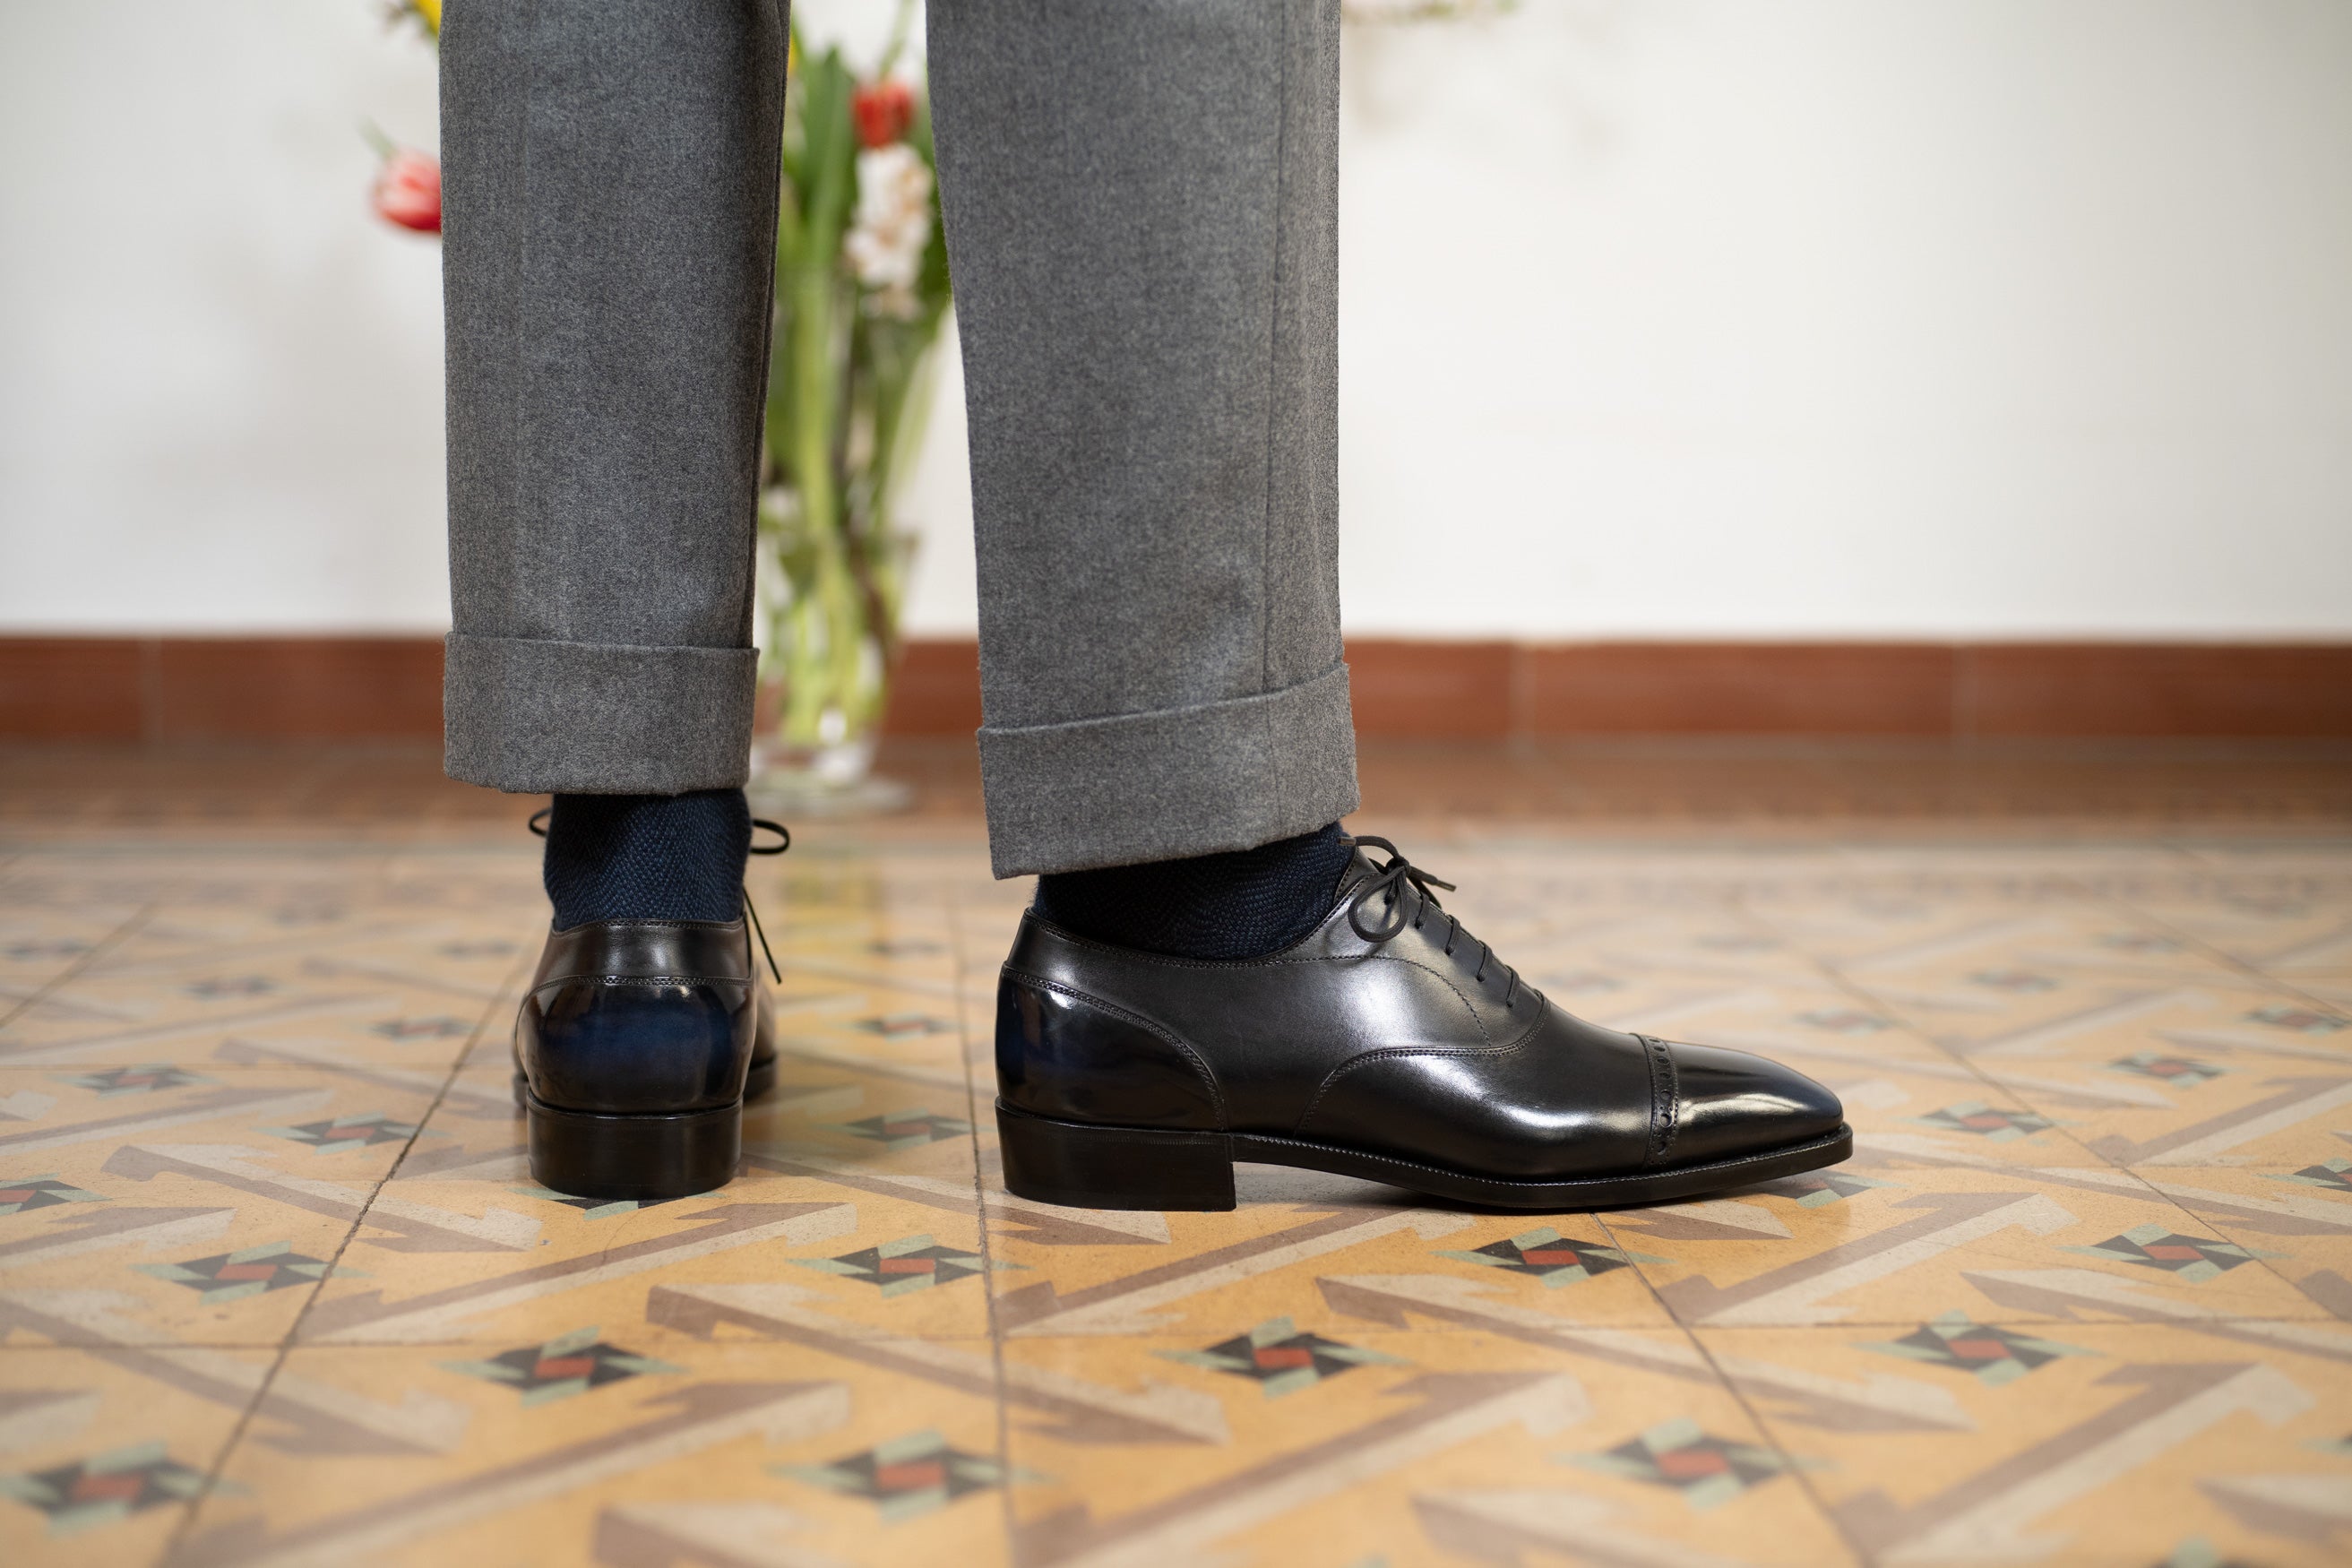 The Oxford vs the Derby Shoe